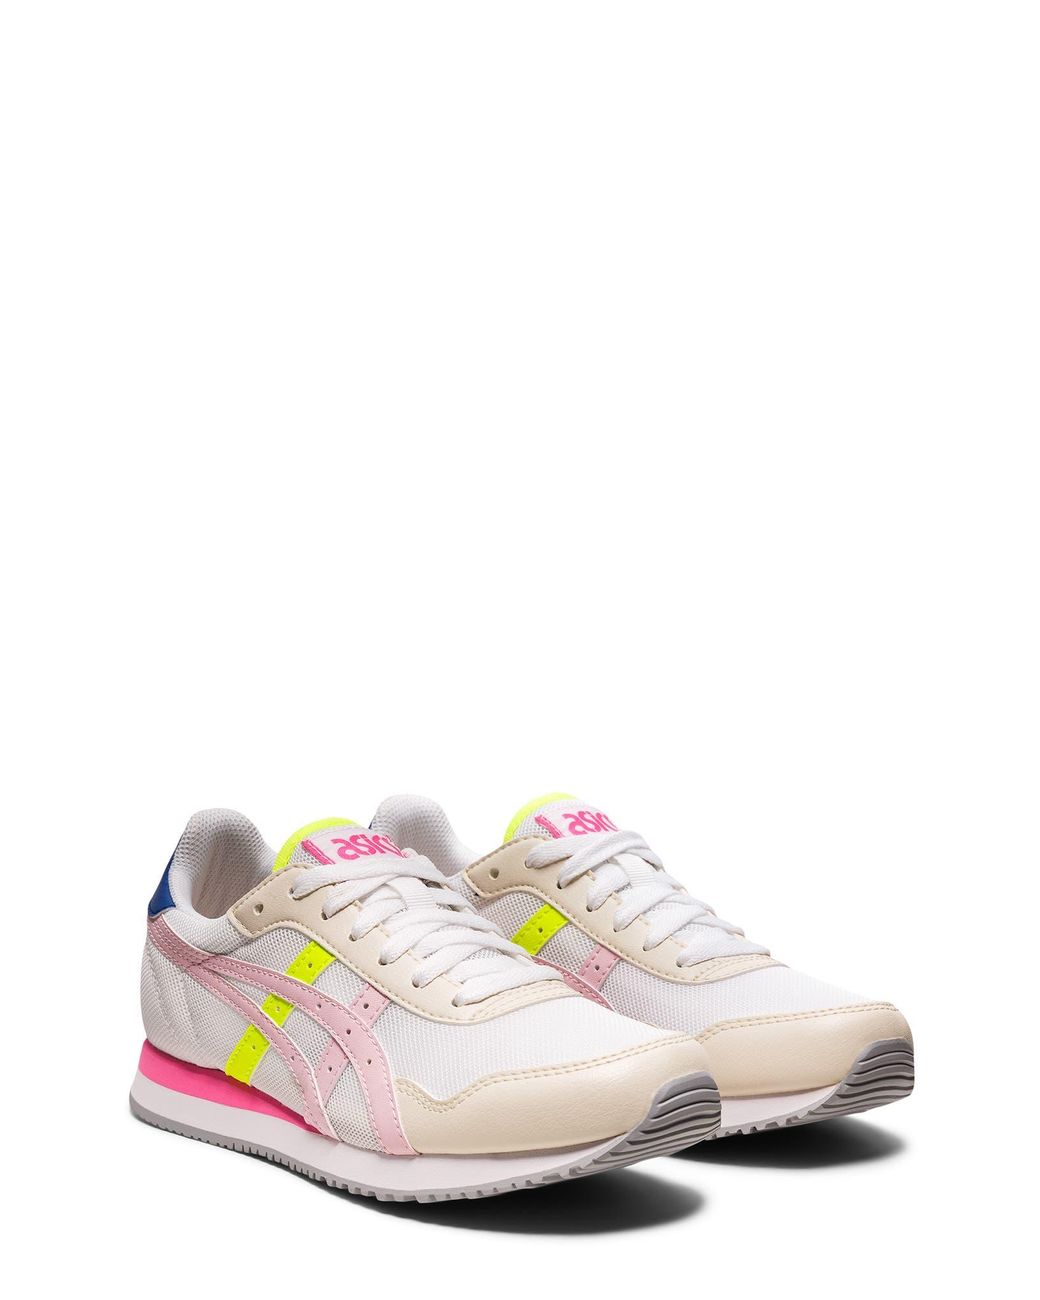 Asics Asics Tiger Running Sneaker In White/cotton Candy At Nordstrom ...